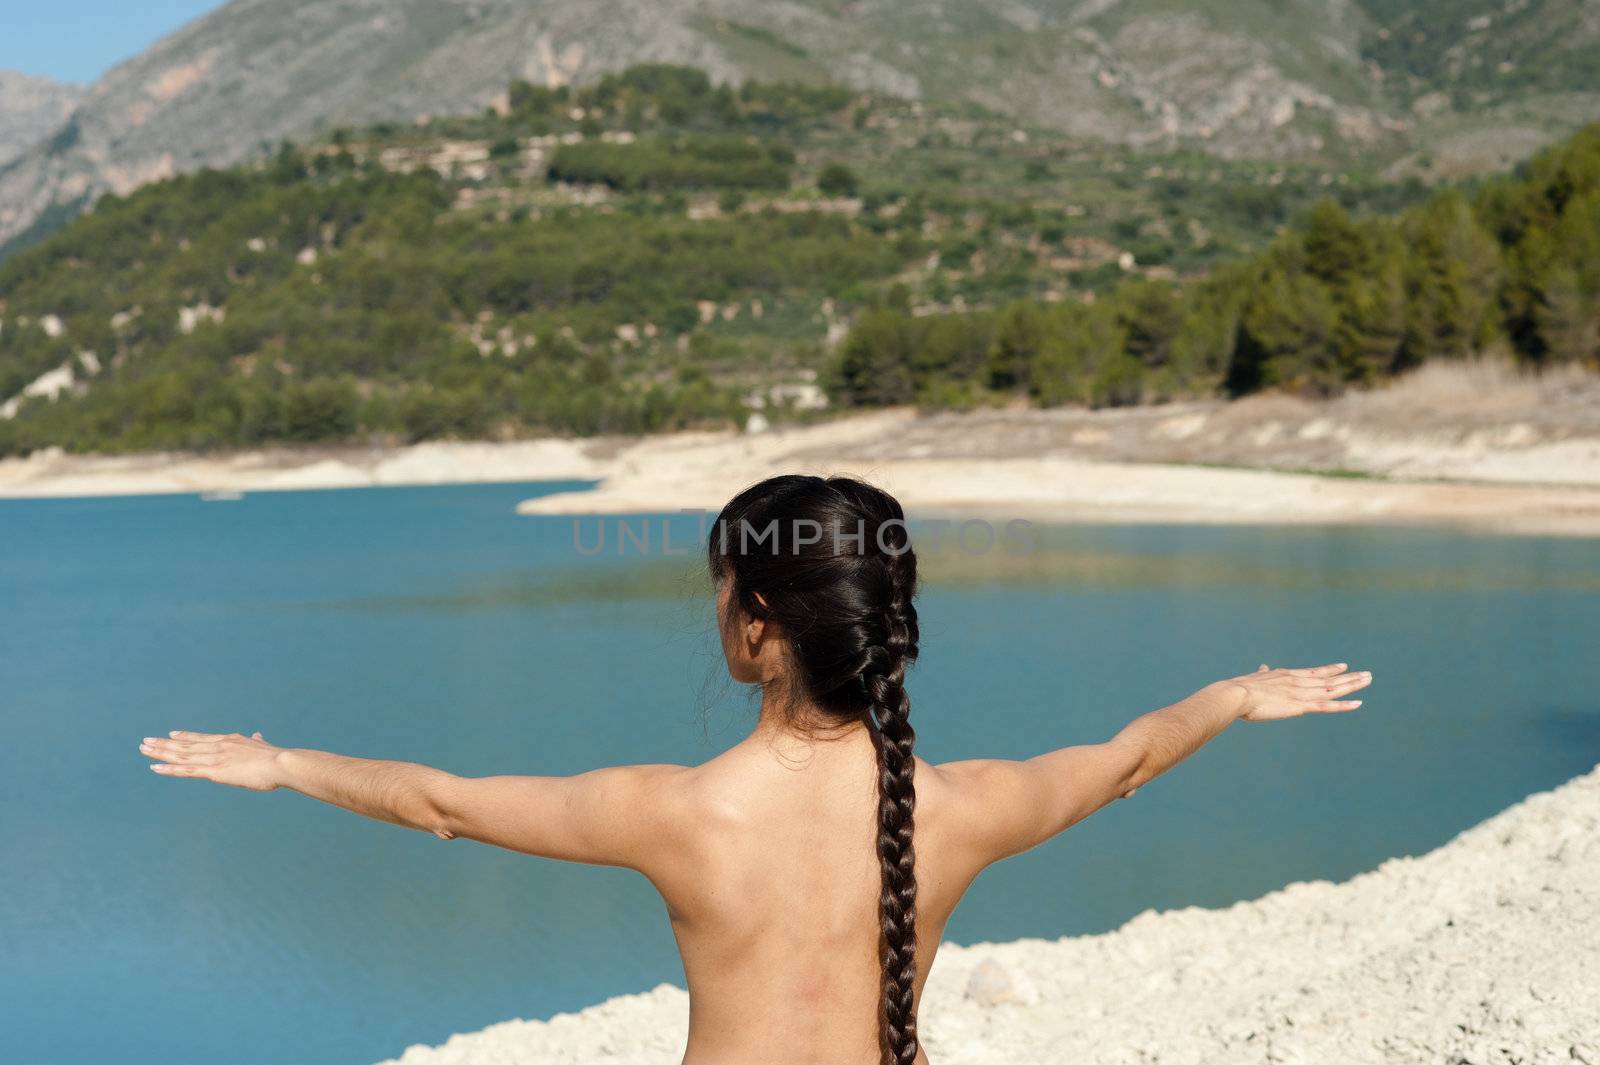 Woman enjoying early morning yoga on the shores of a lake by hemeroskopion